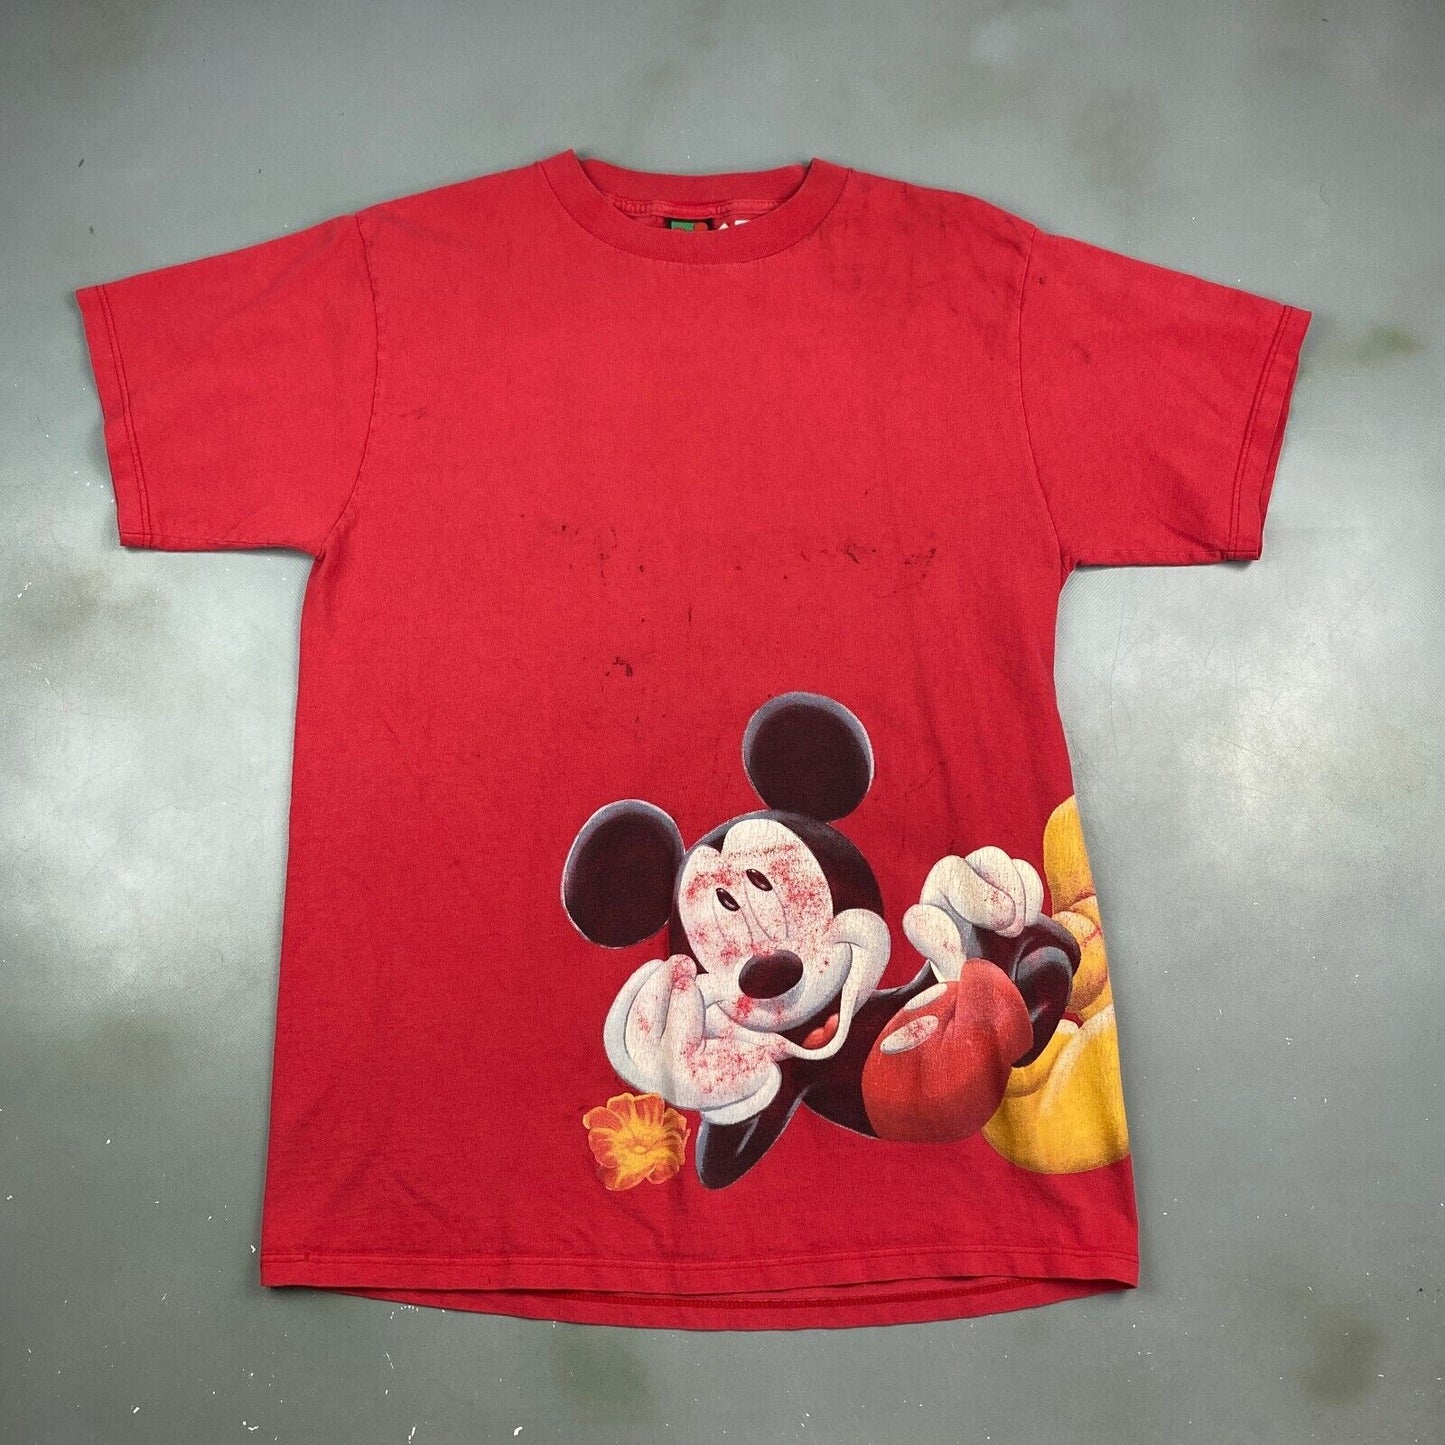 VINTAGE 90s Mickey Mouse Cartoon Mickey Unlimited T-Shirt MadeinUSA sz Large Men